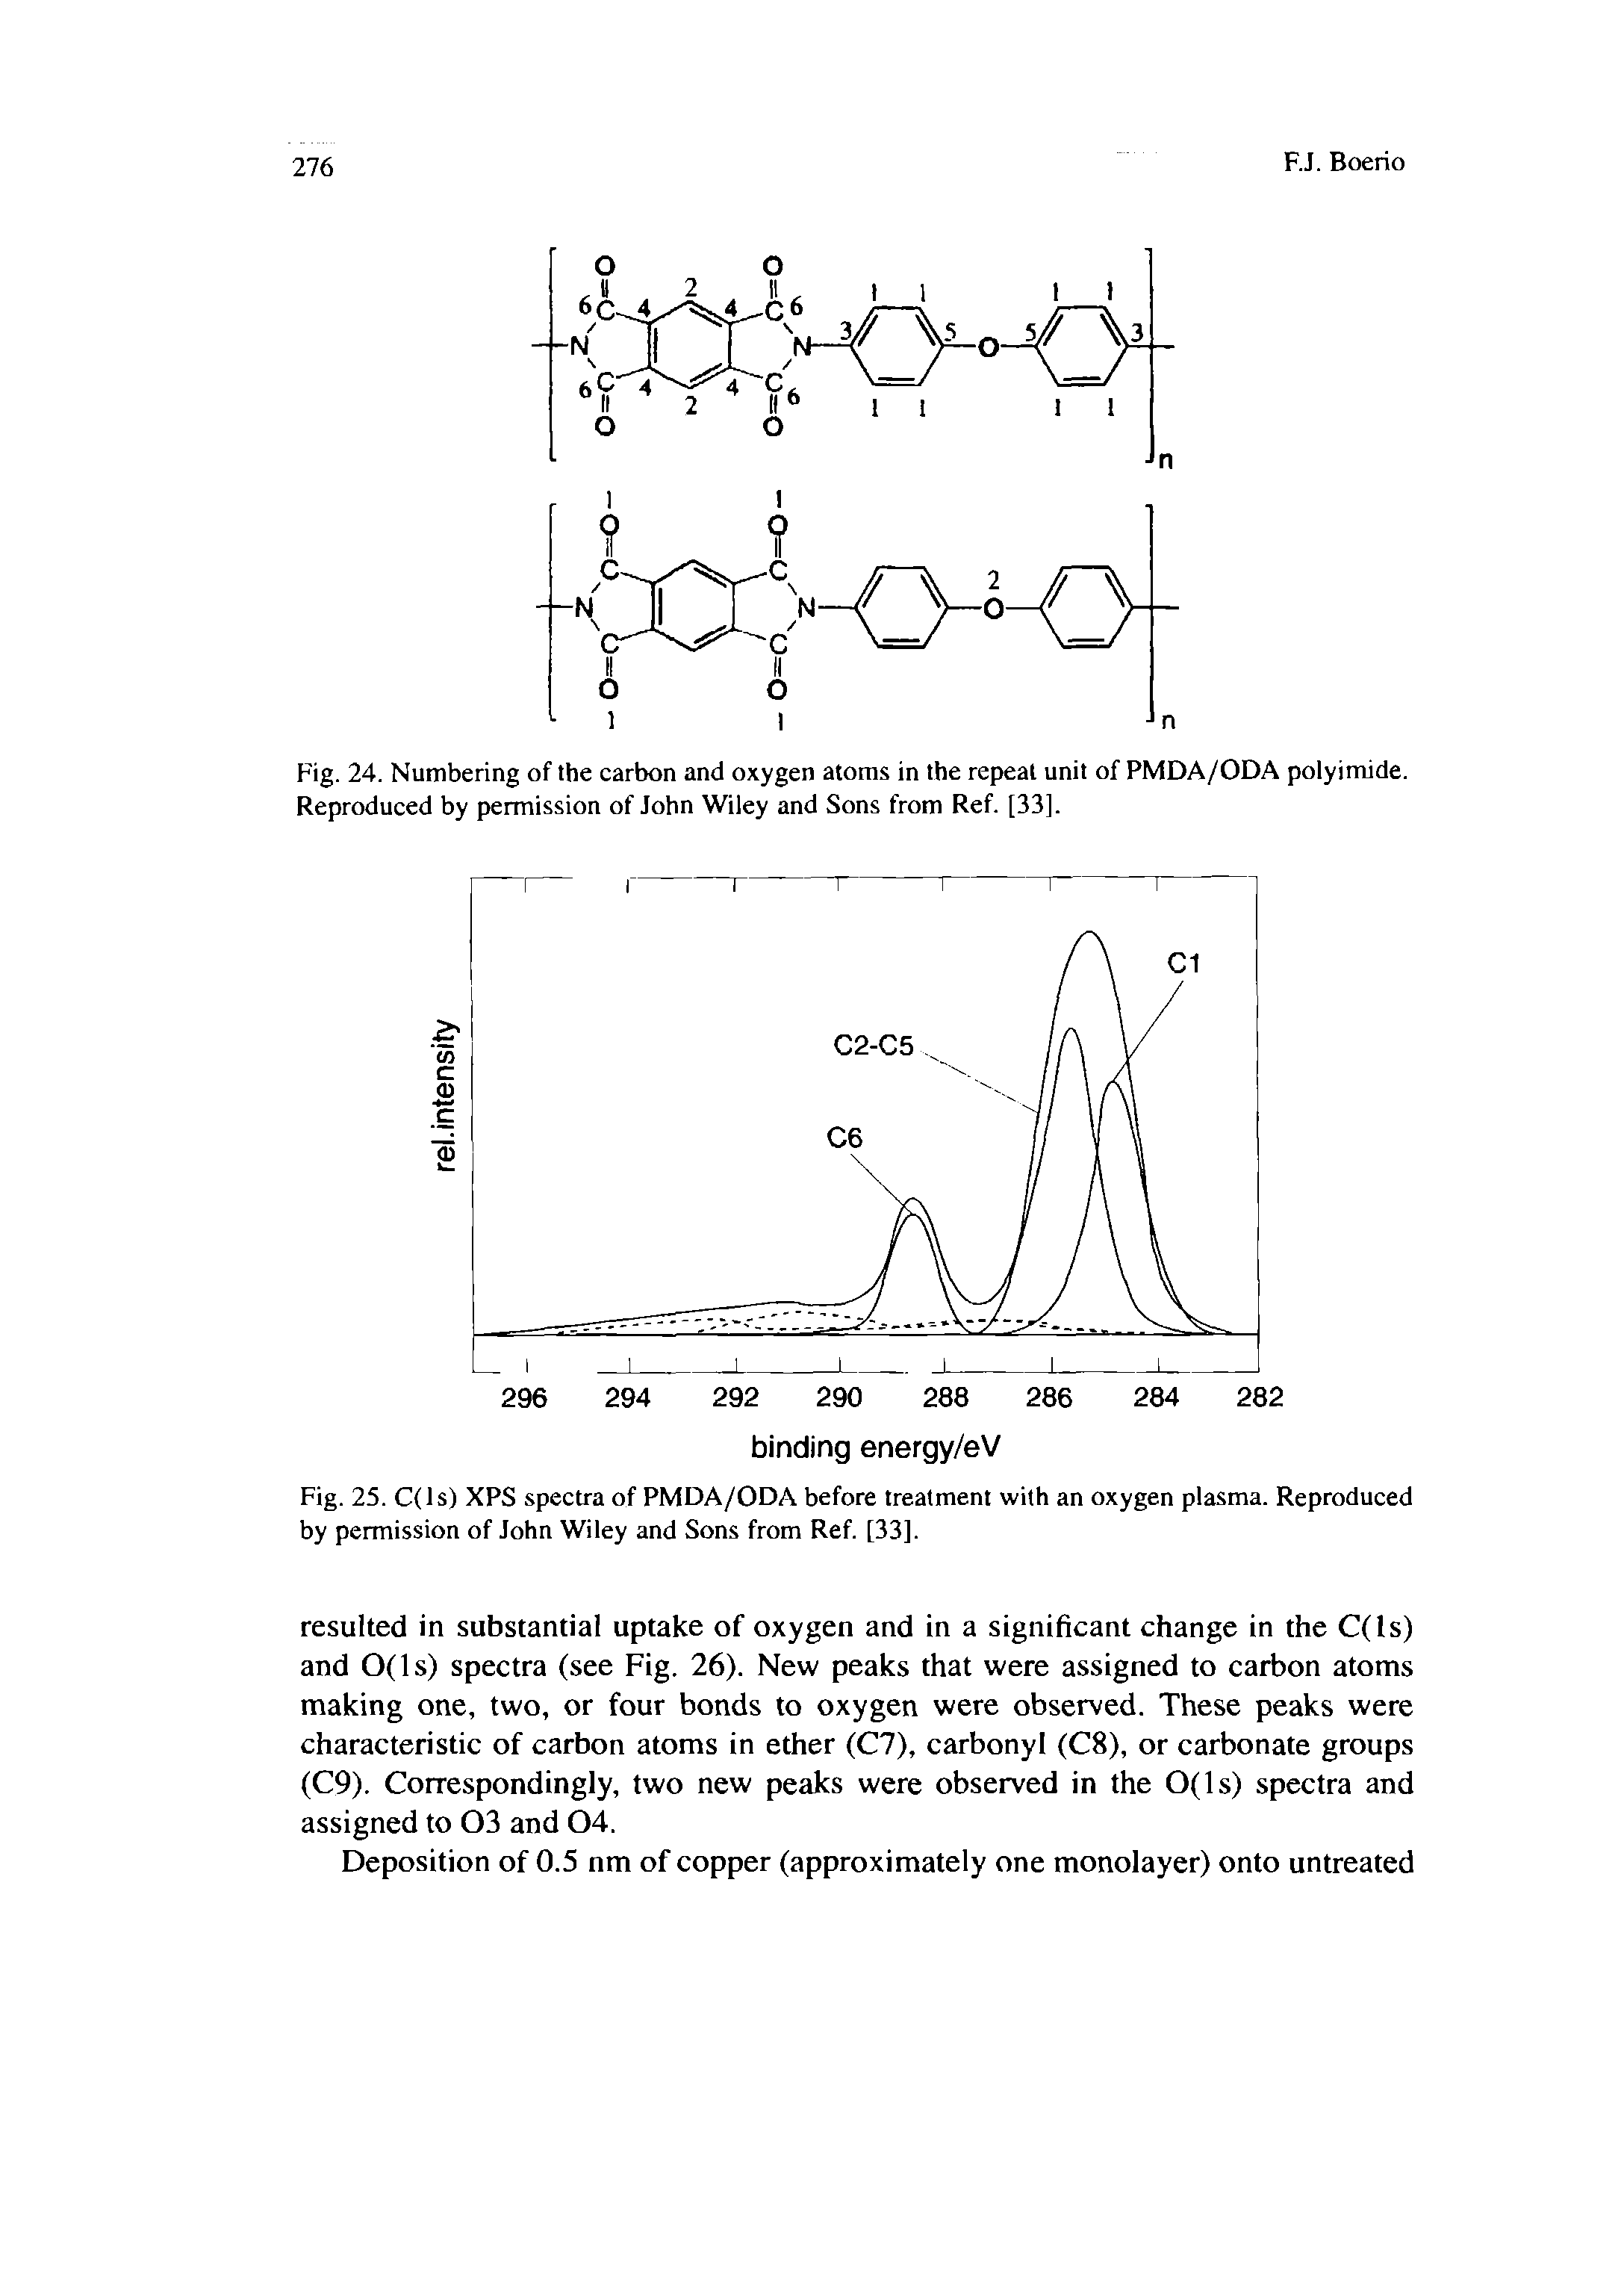 Fig. 24. Numbering of the earbon and oxygen atoms in the repeat unit of PMDA/ODA polyimide. Reprodueed by permission of John Wiley and Sons from Ref. [33].